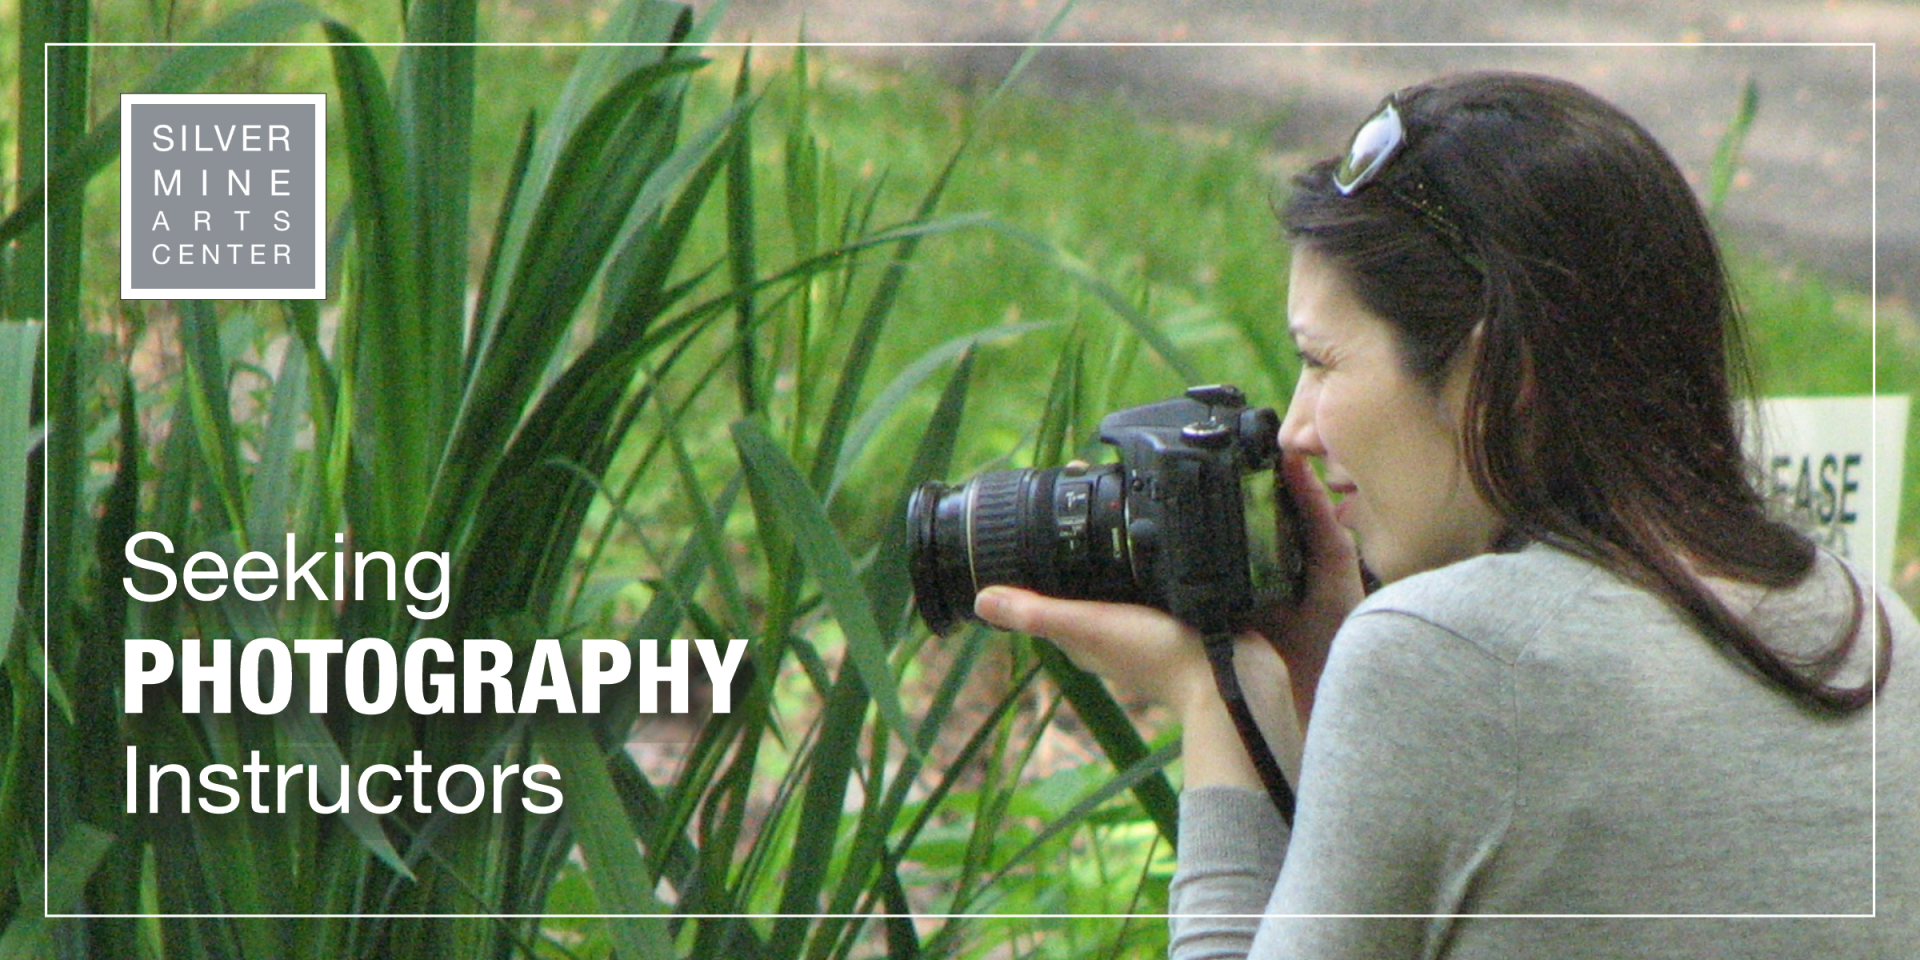 Photography Instructor at Silvermine Arts Center